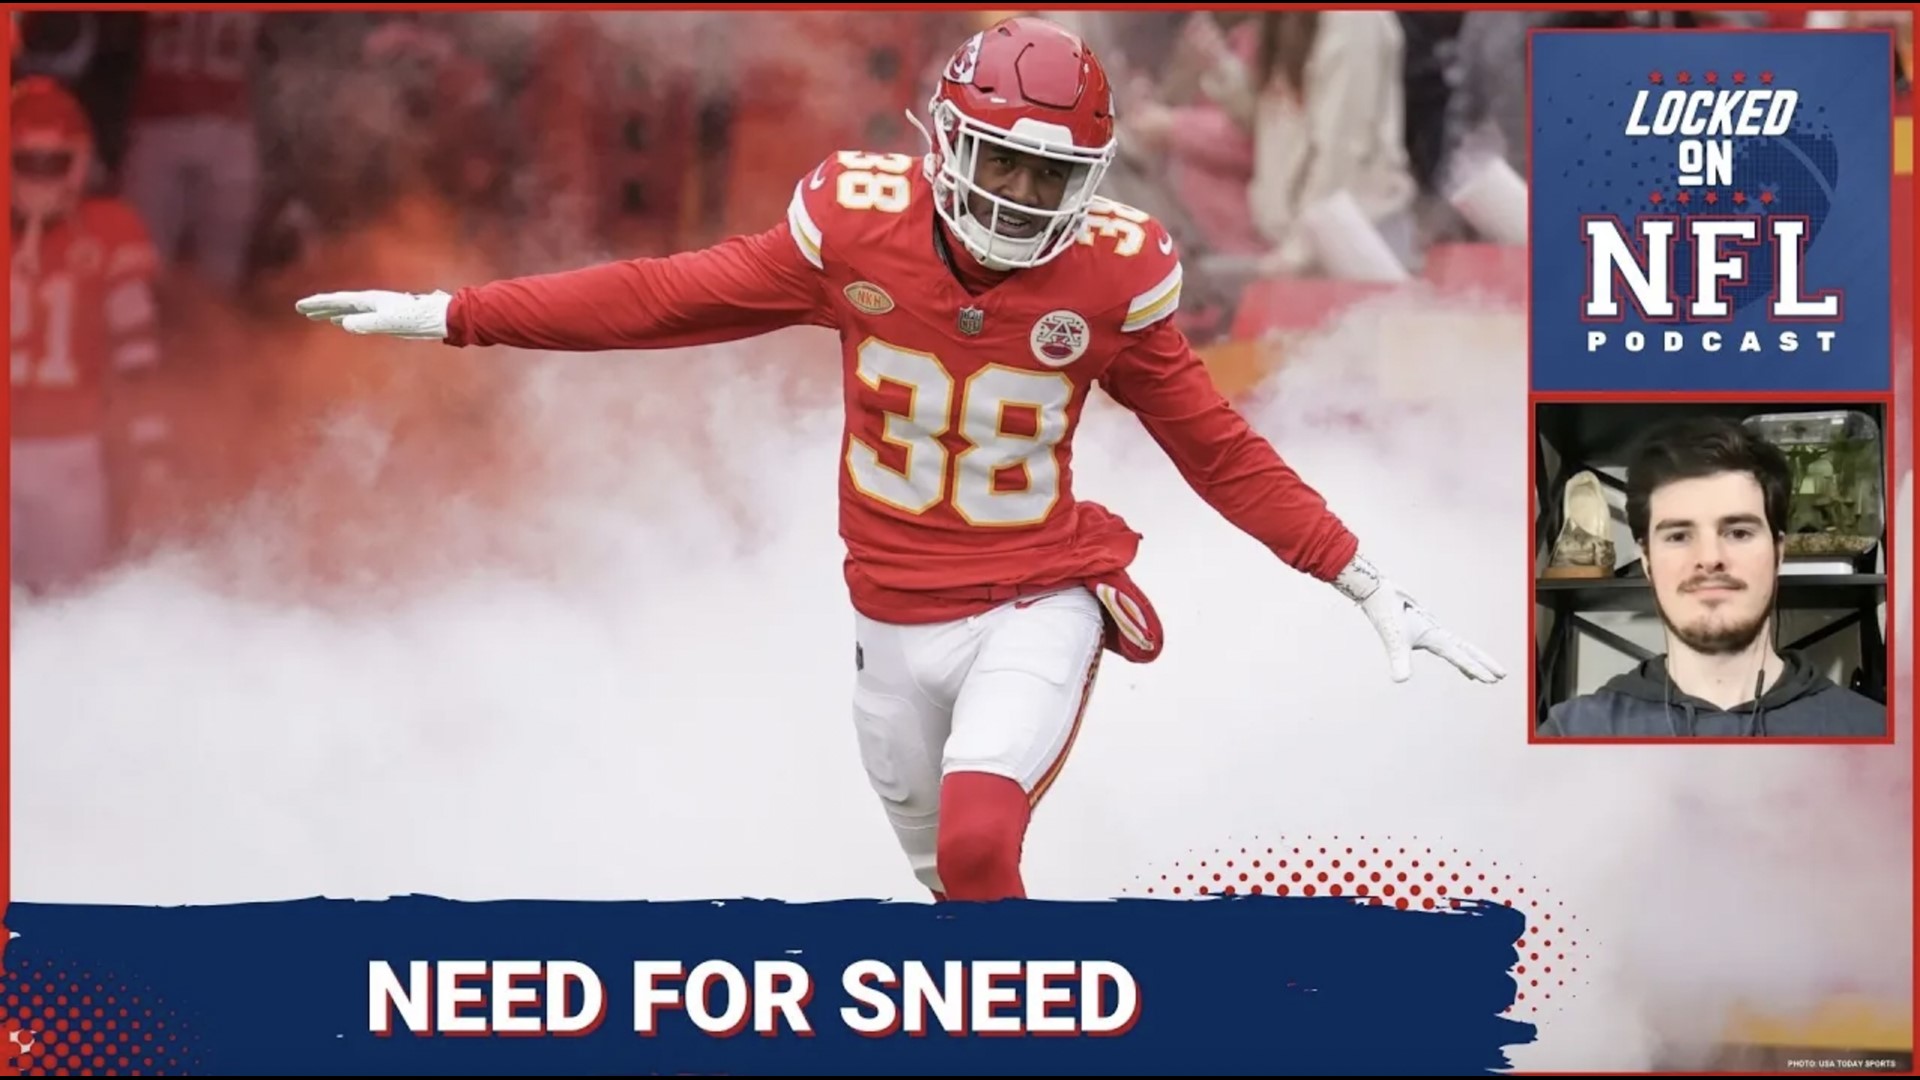 We grade the L'Jarius Sneed trade for both the Tennessee Titans and Kansas City Chiefs, and also talk about the changes the Los Angeles Chargers have undergone.